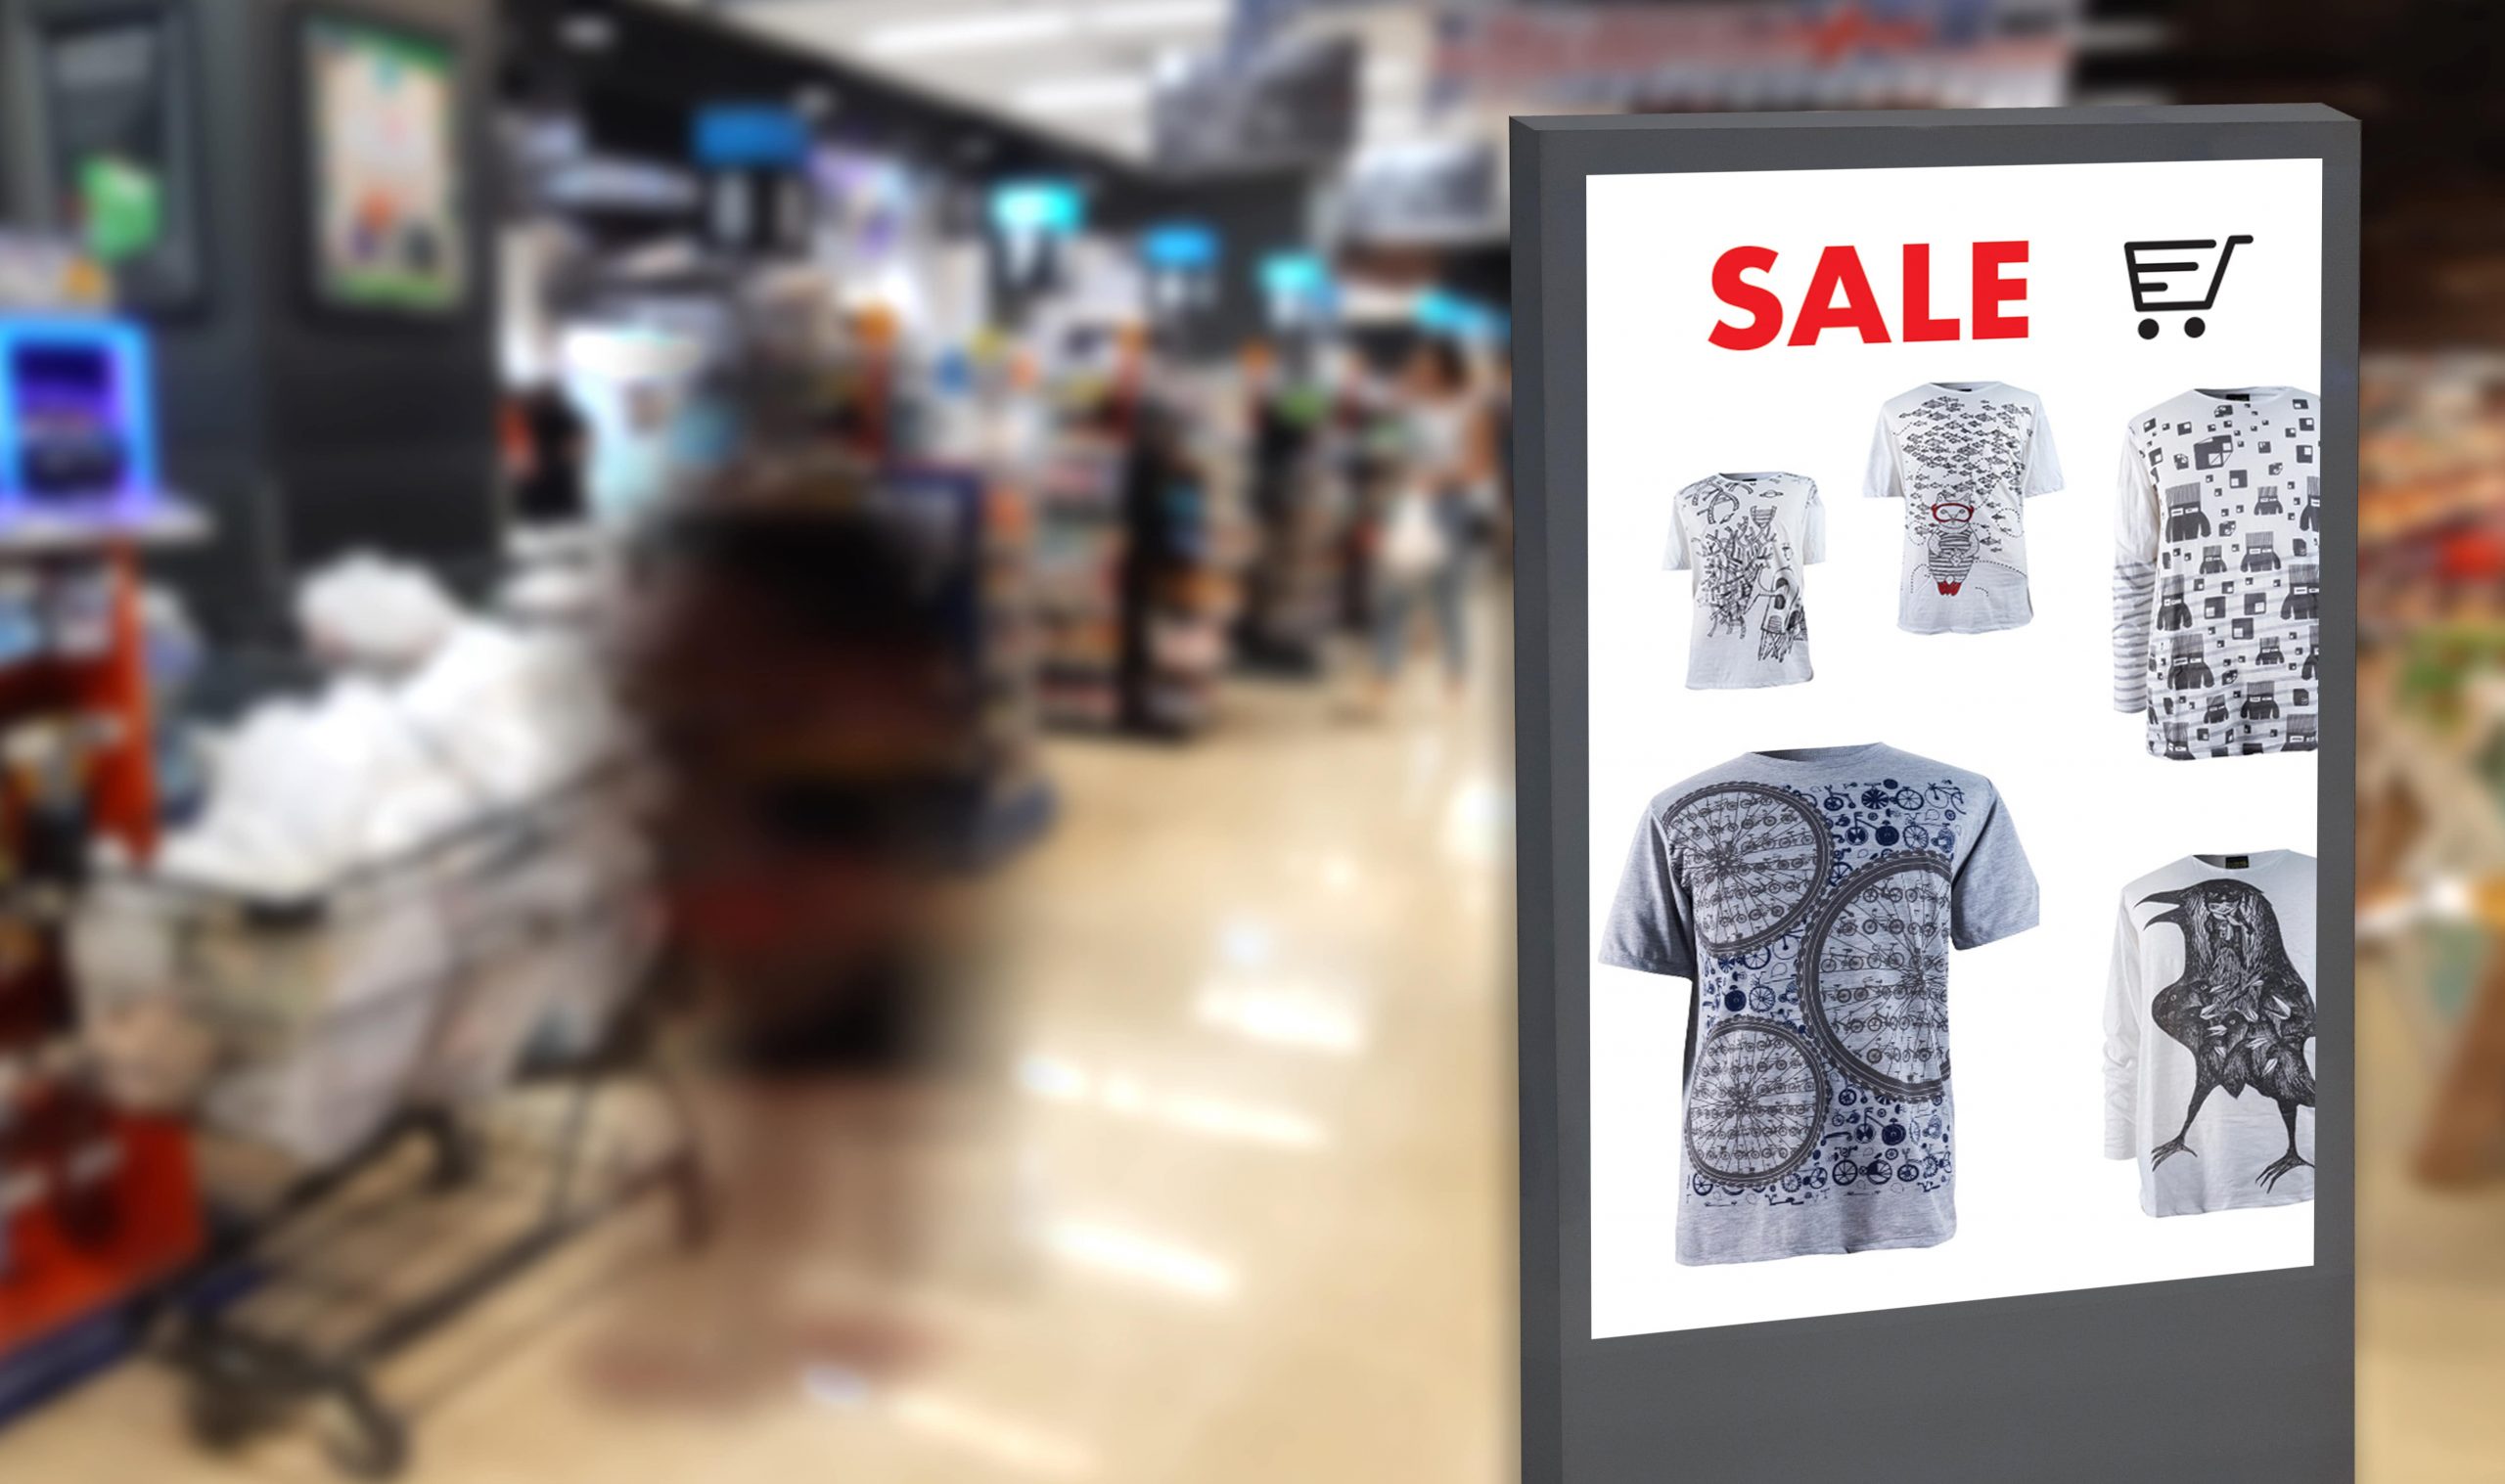 How a Blend of Digital and Print Signage Improved ROI